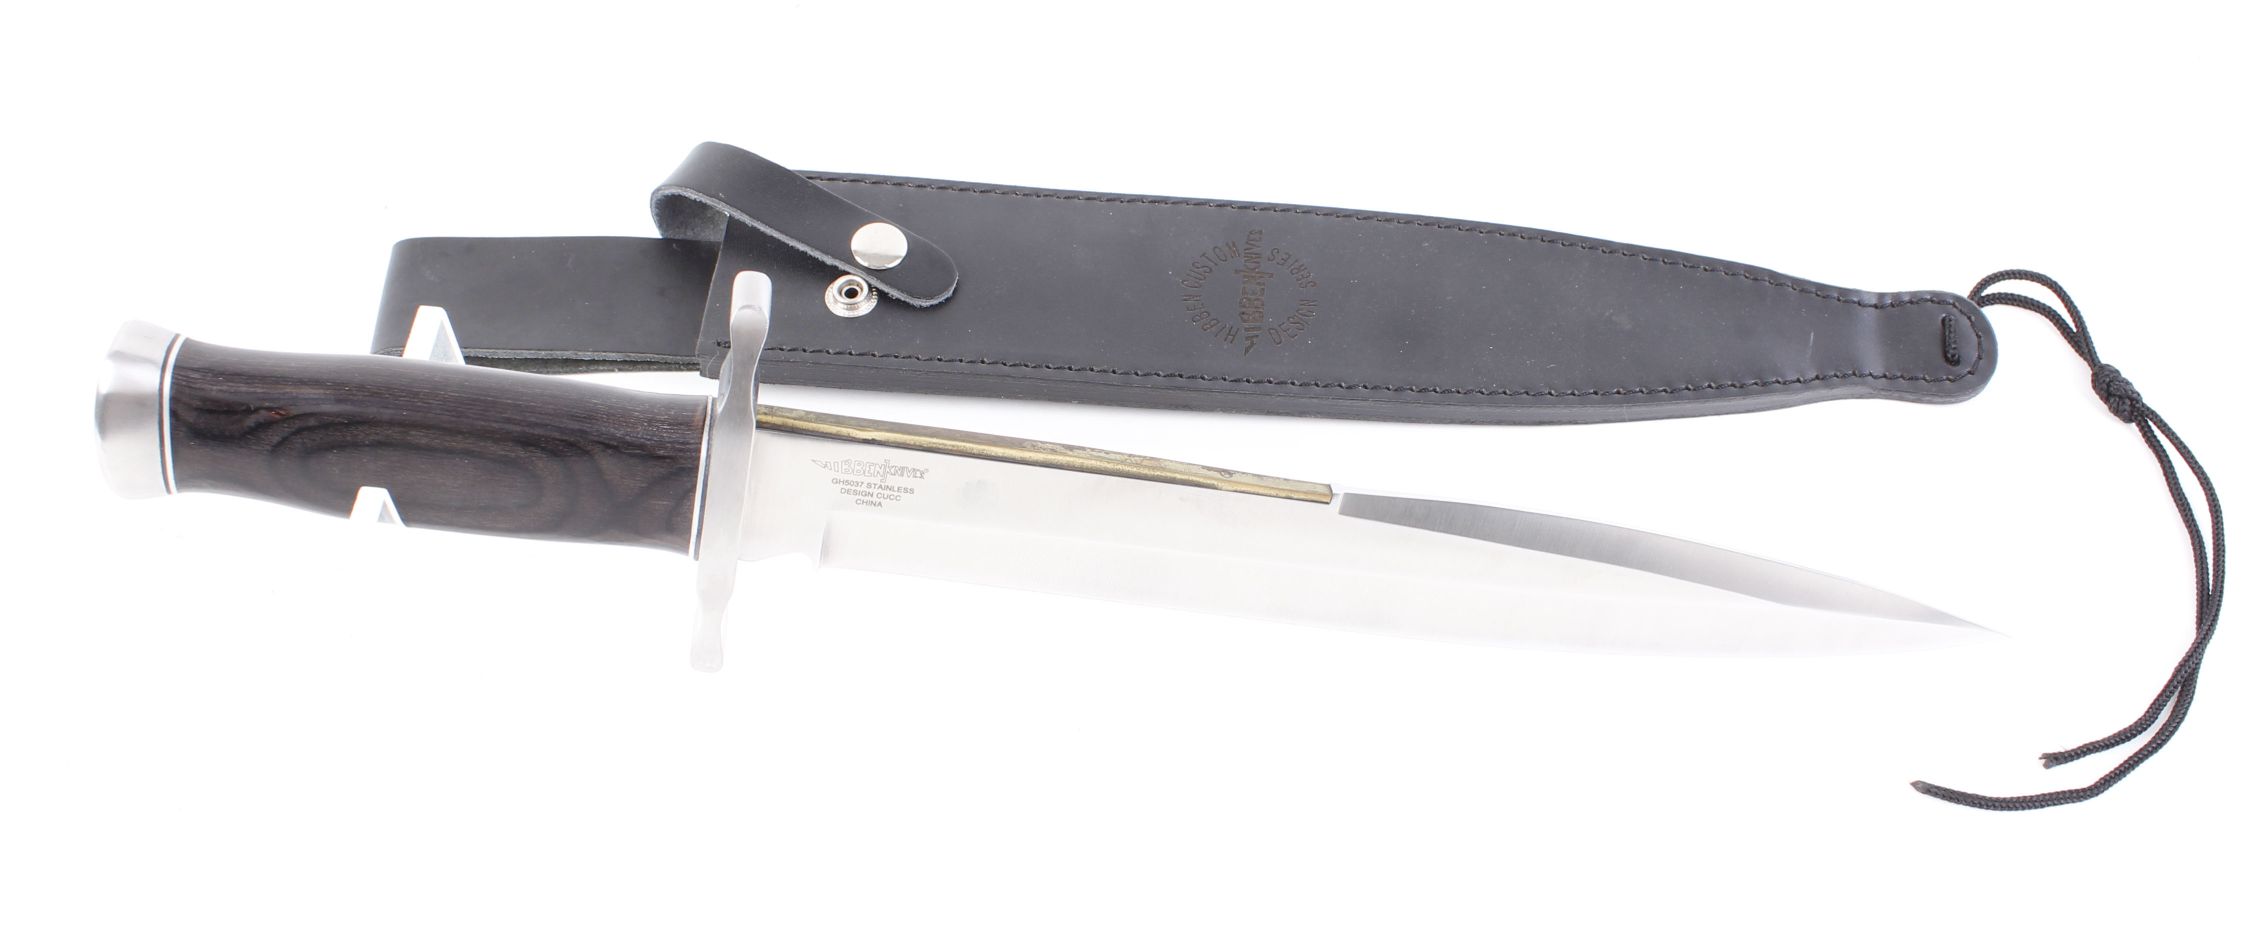 Hibben Custom sheath knife, 12 ins double edged stainless steel blade with inset brass ridge, - Image 4 of 4